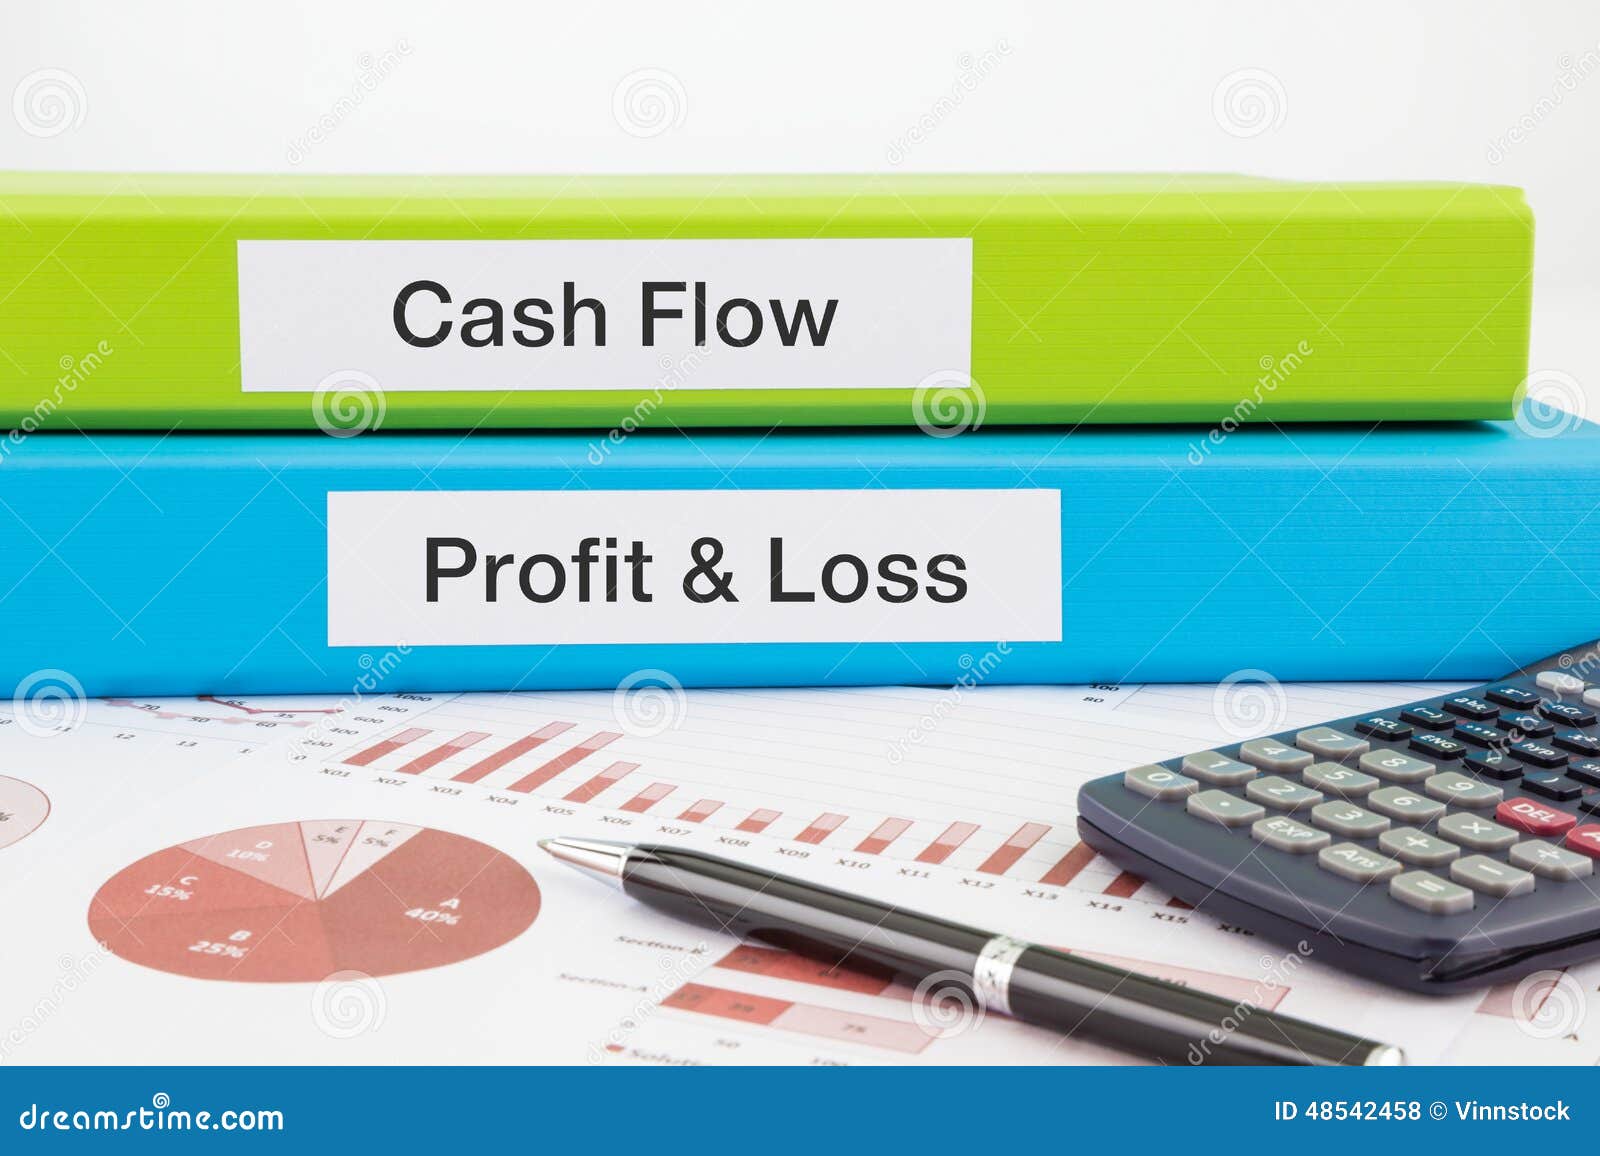 cash flow, profit & loss documents with reports